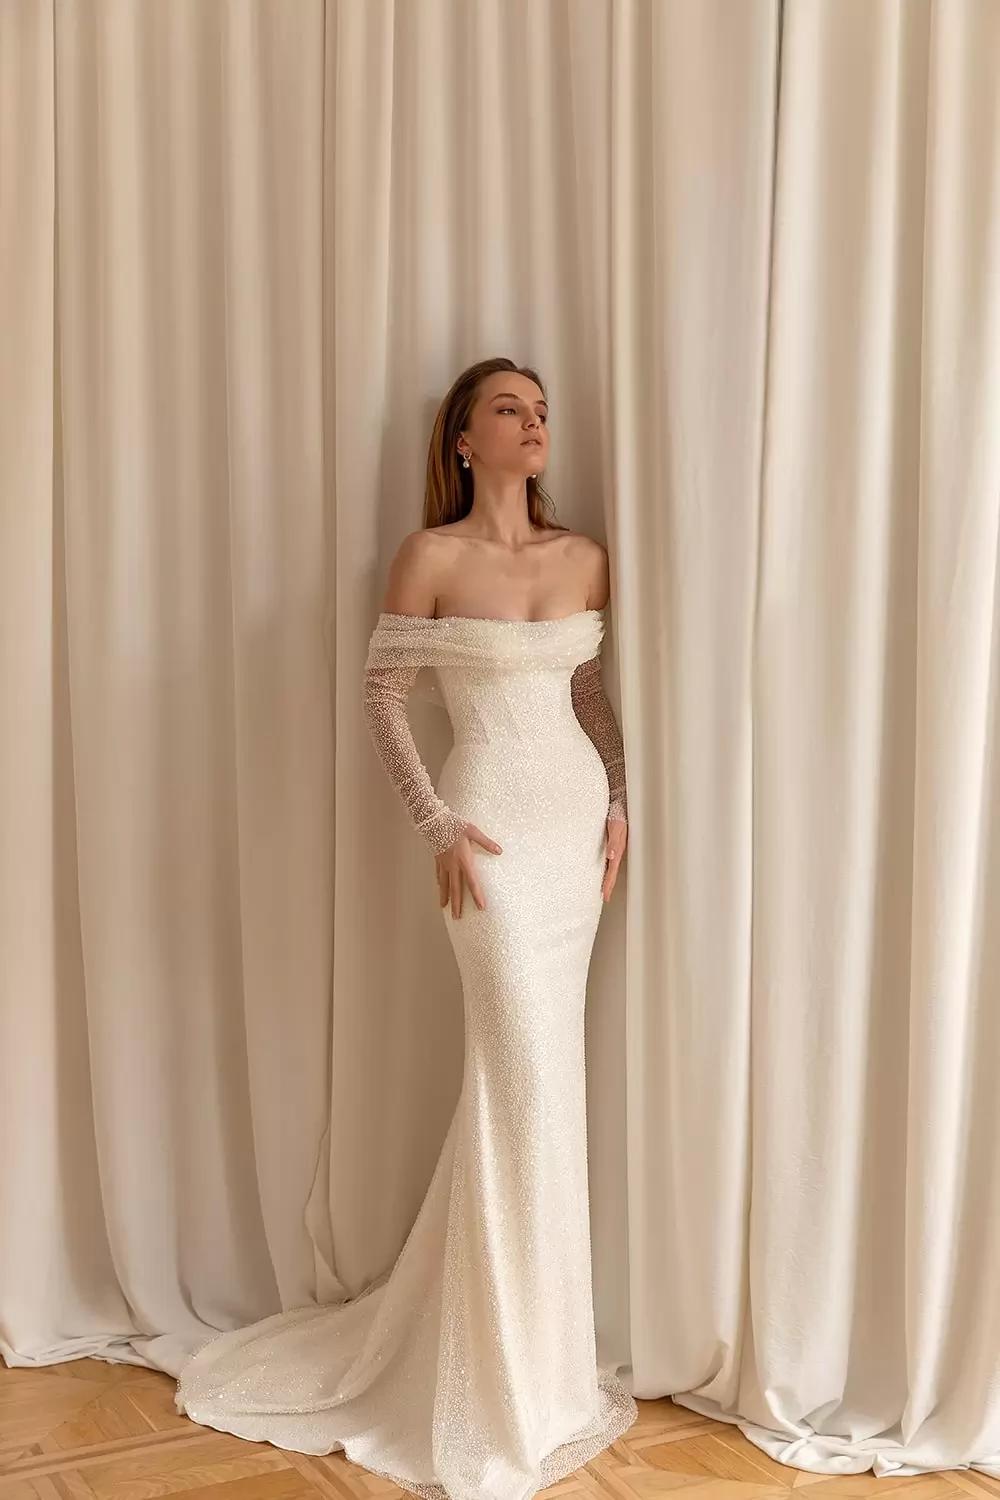 Model wearing a white bridal gown